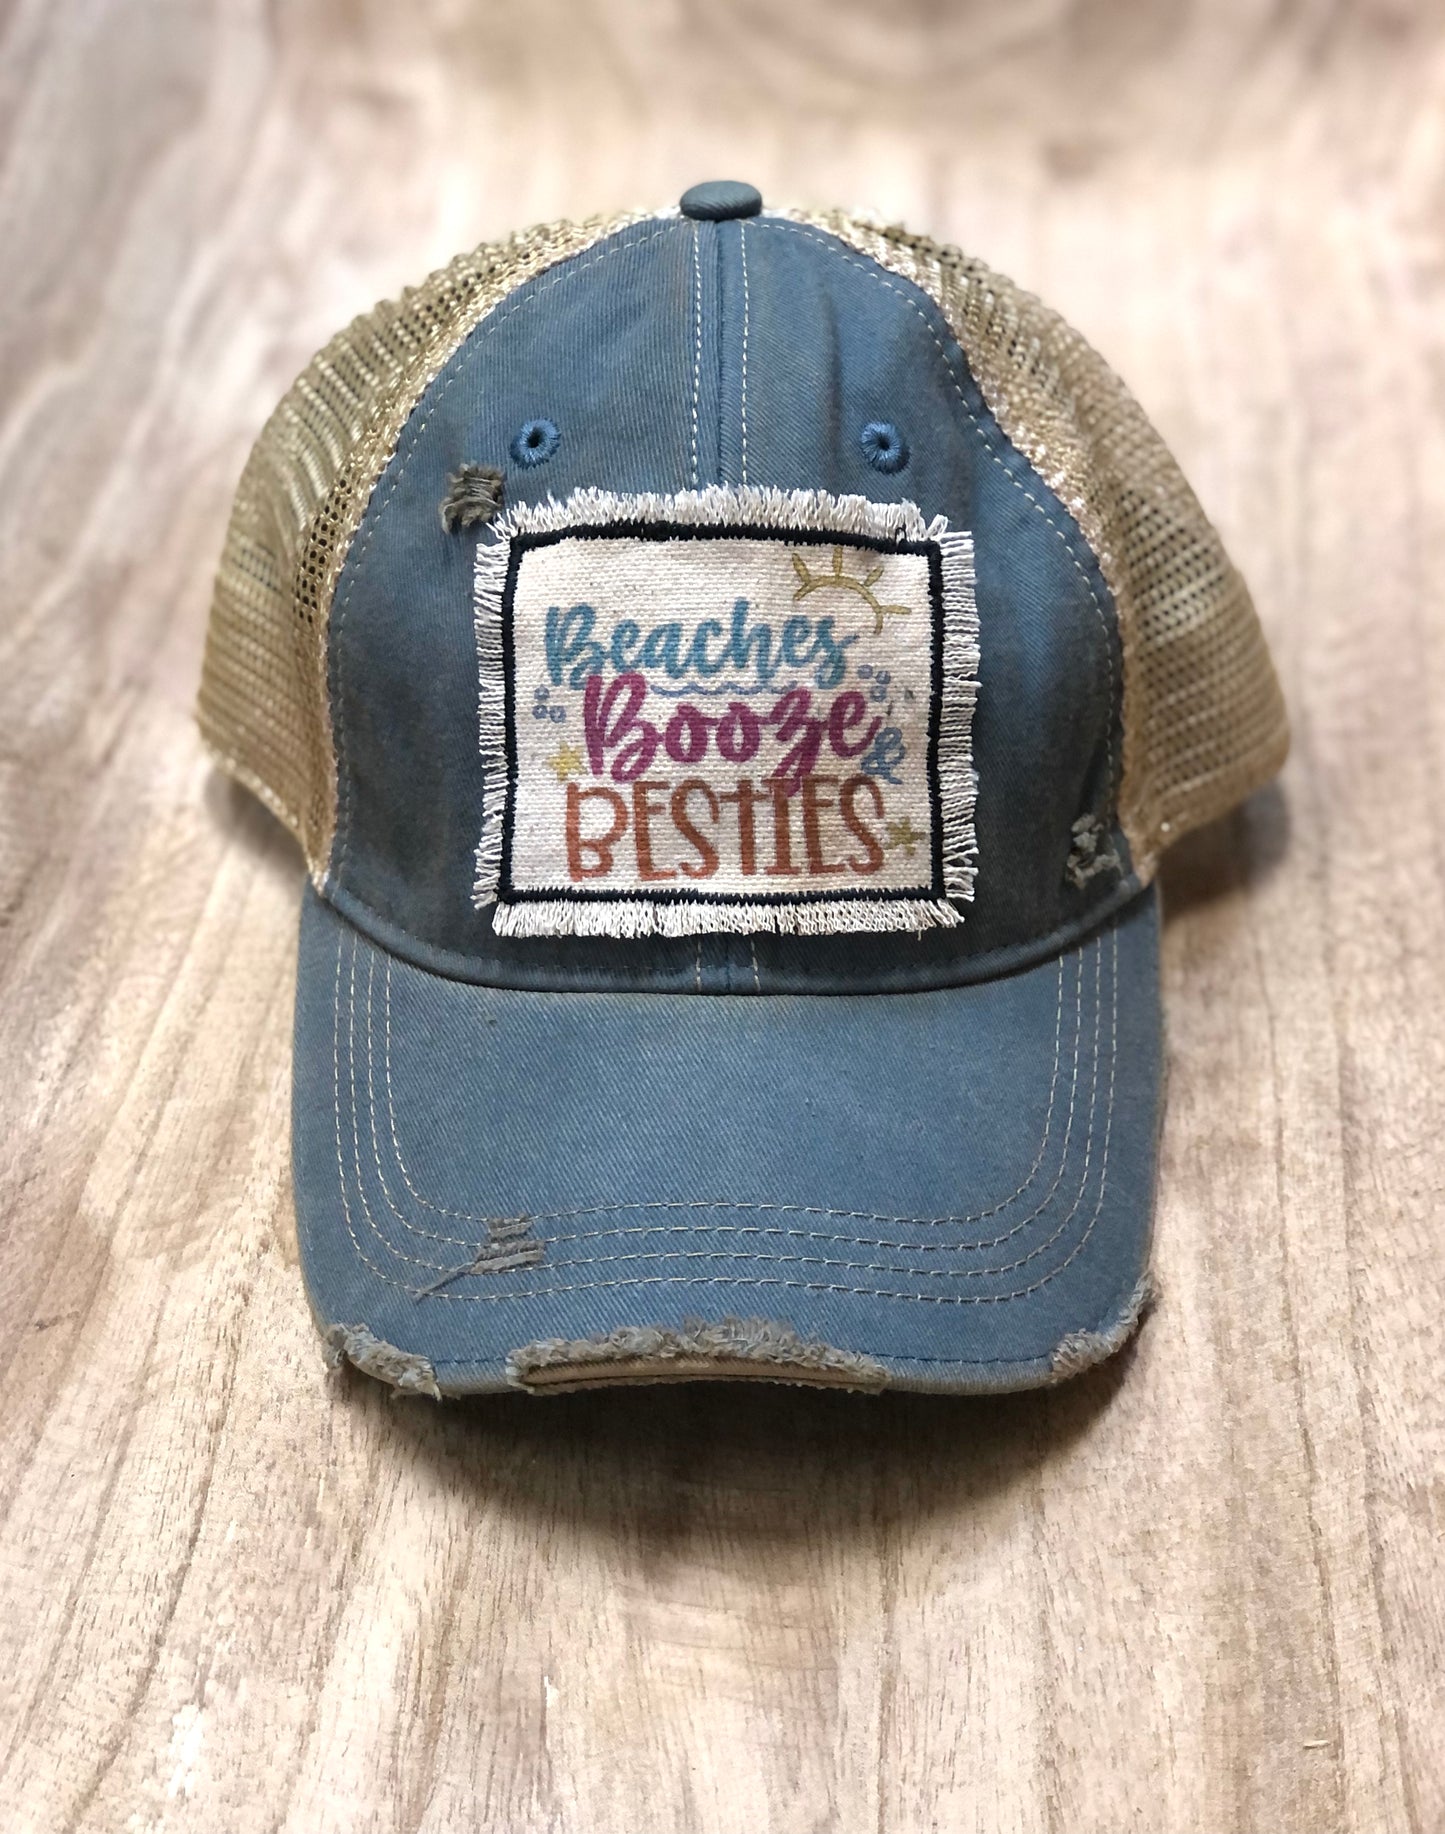 Beaches, Booze, and Besties distressed hat